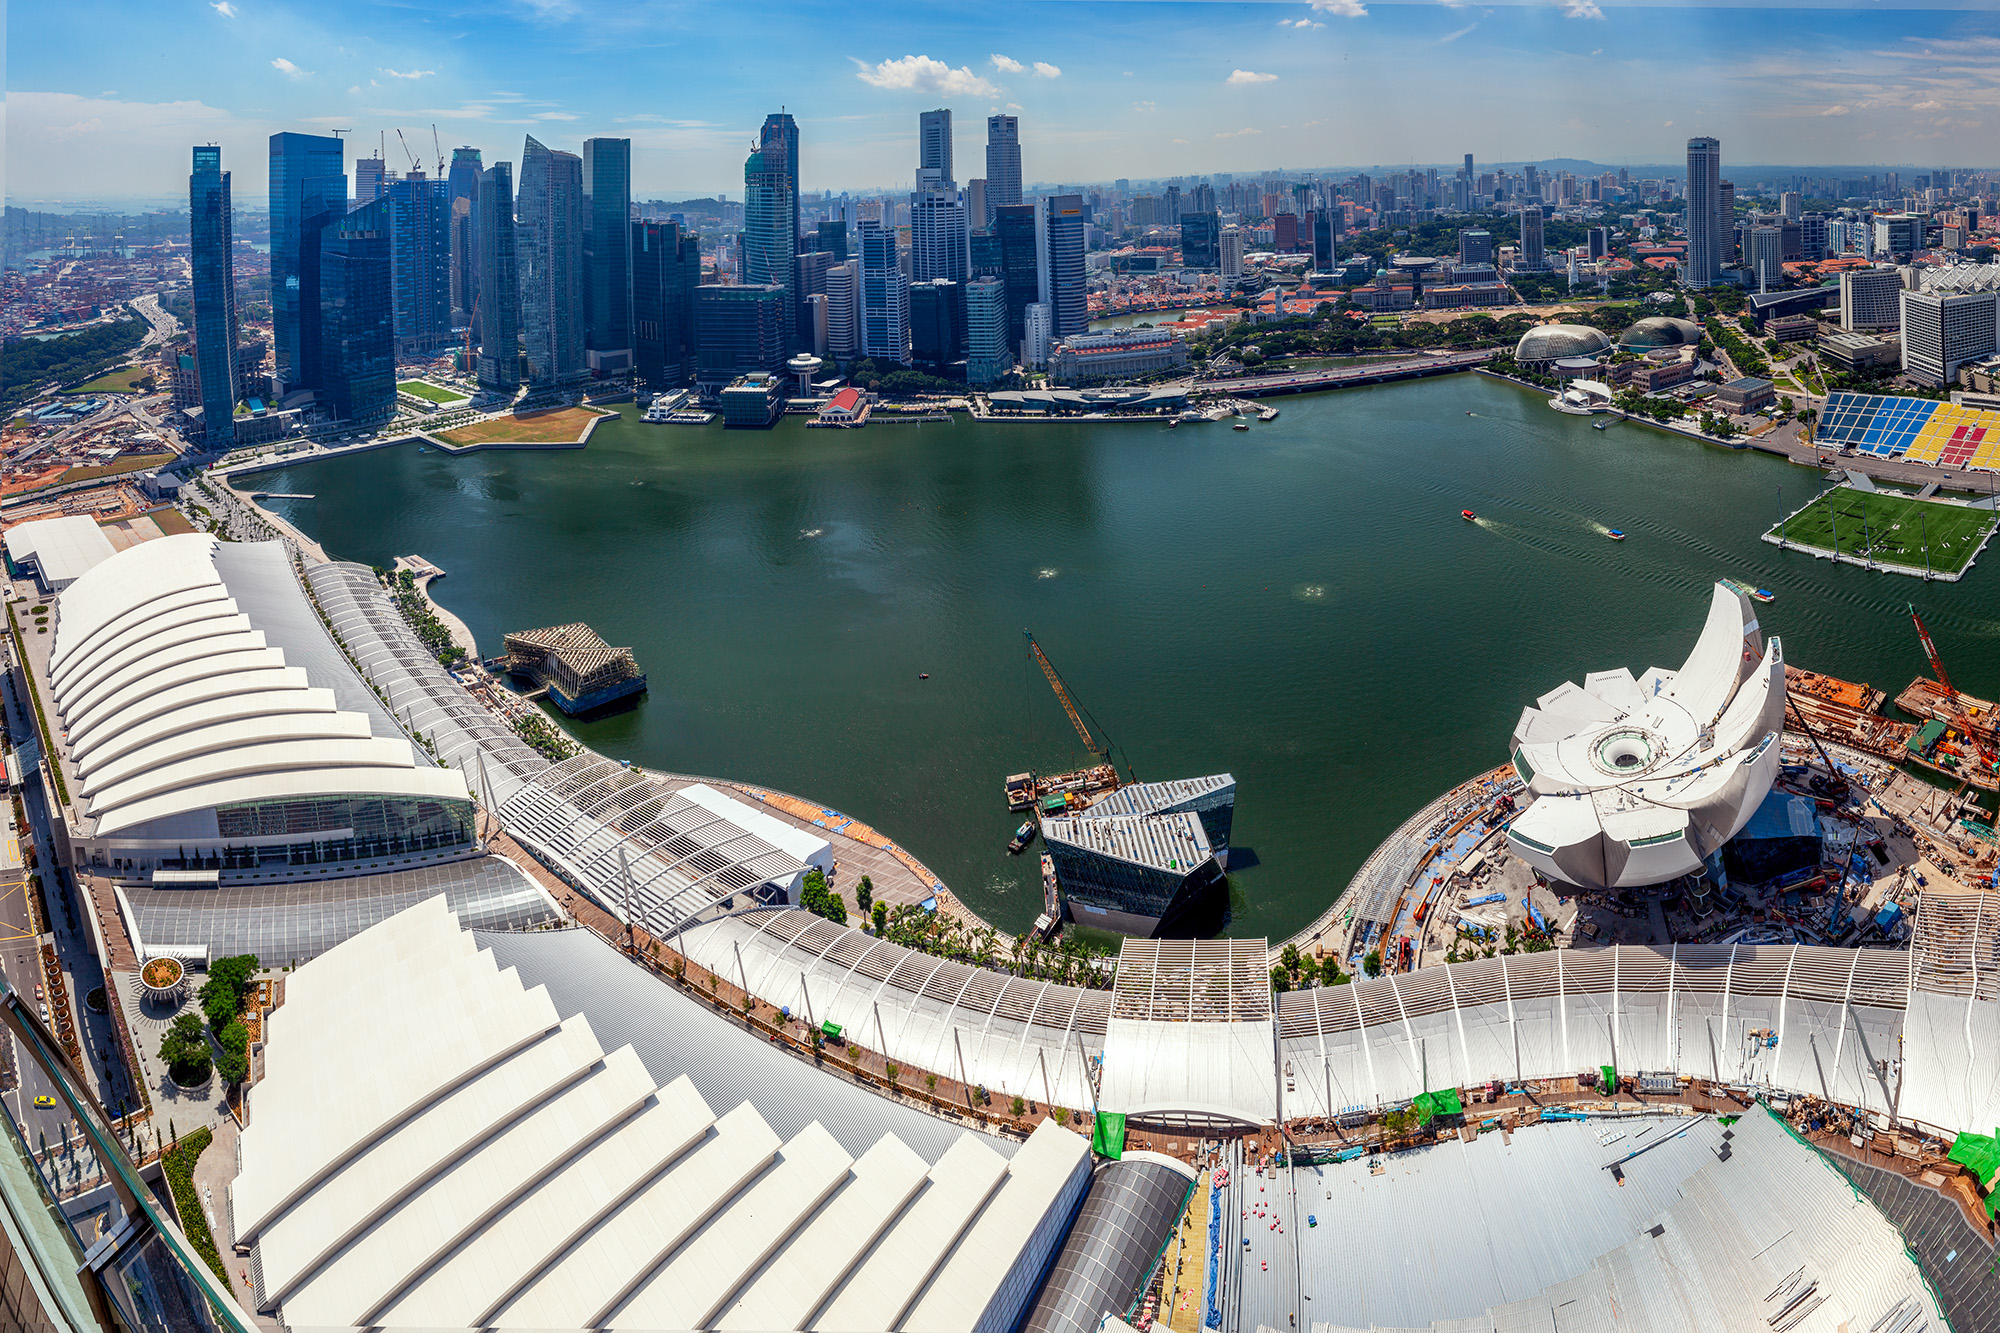 This image captures the expansive view from the top of the Marina Bay Sands Hotel, showcasing the broad cityscape and foreground...